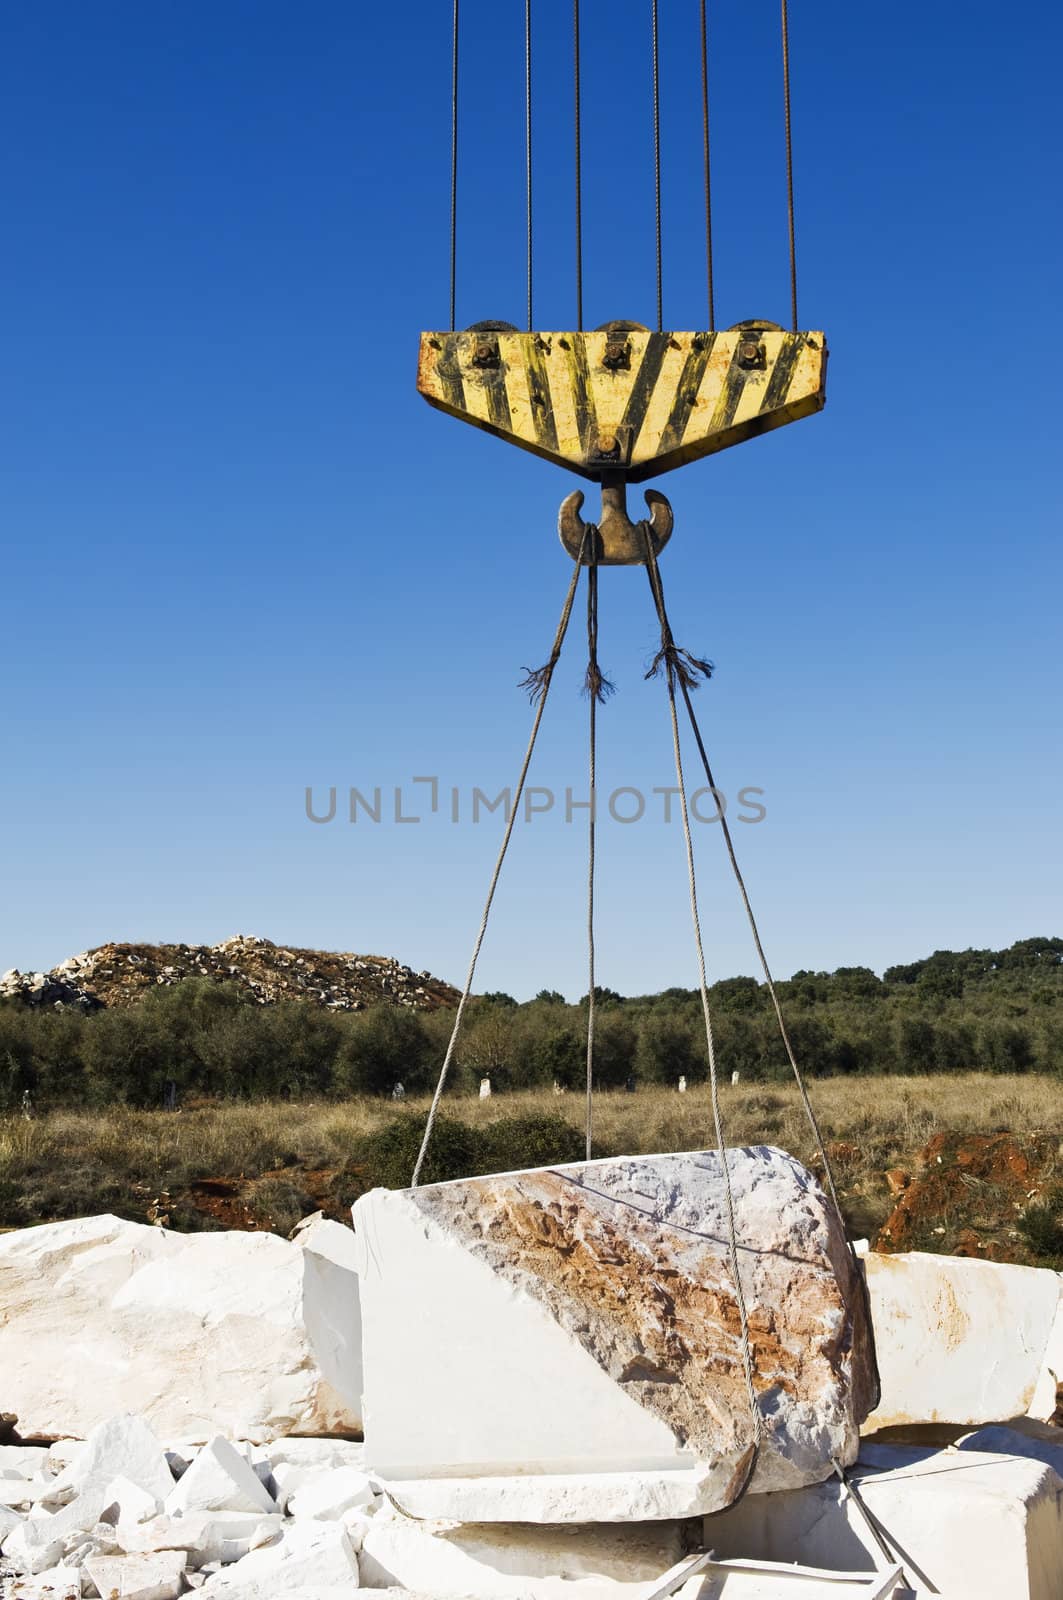 Lifting pulley in a marble quarry, Alentejo, Portugal